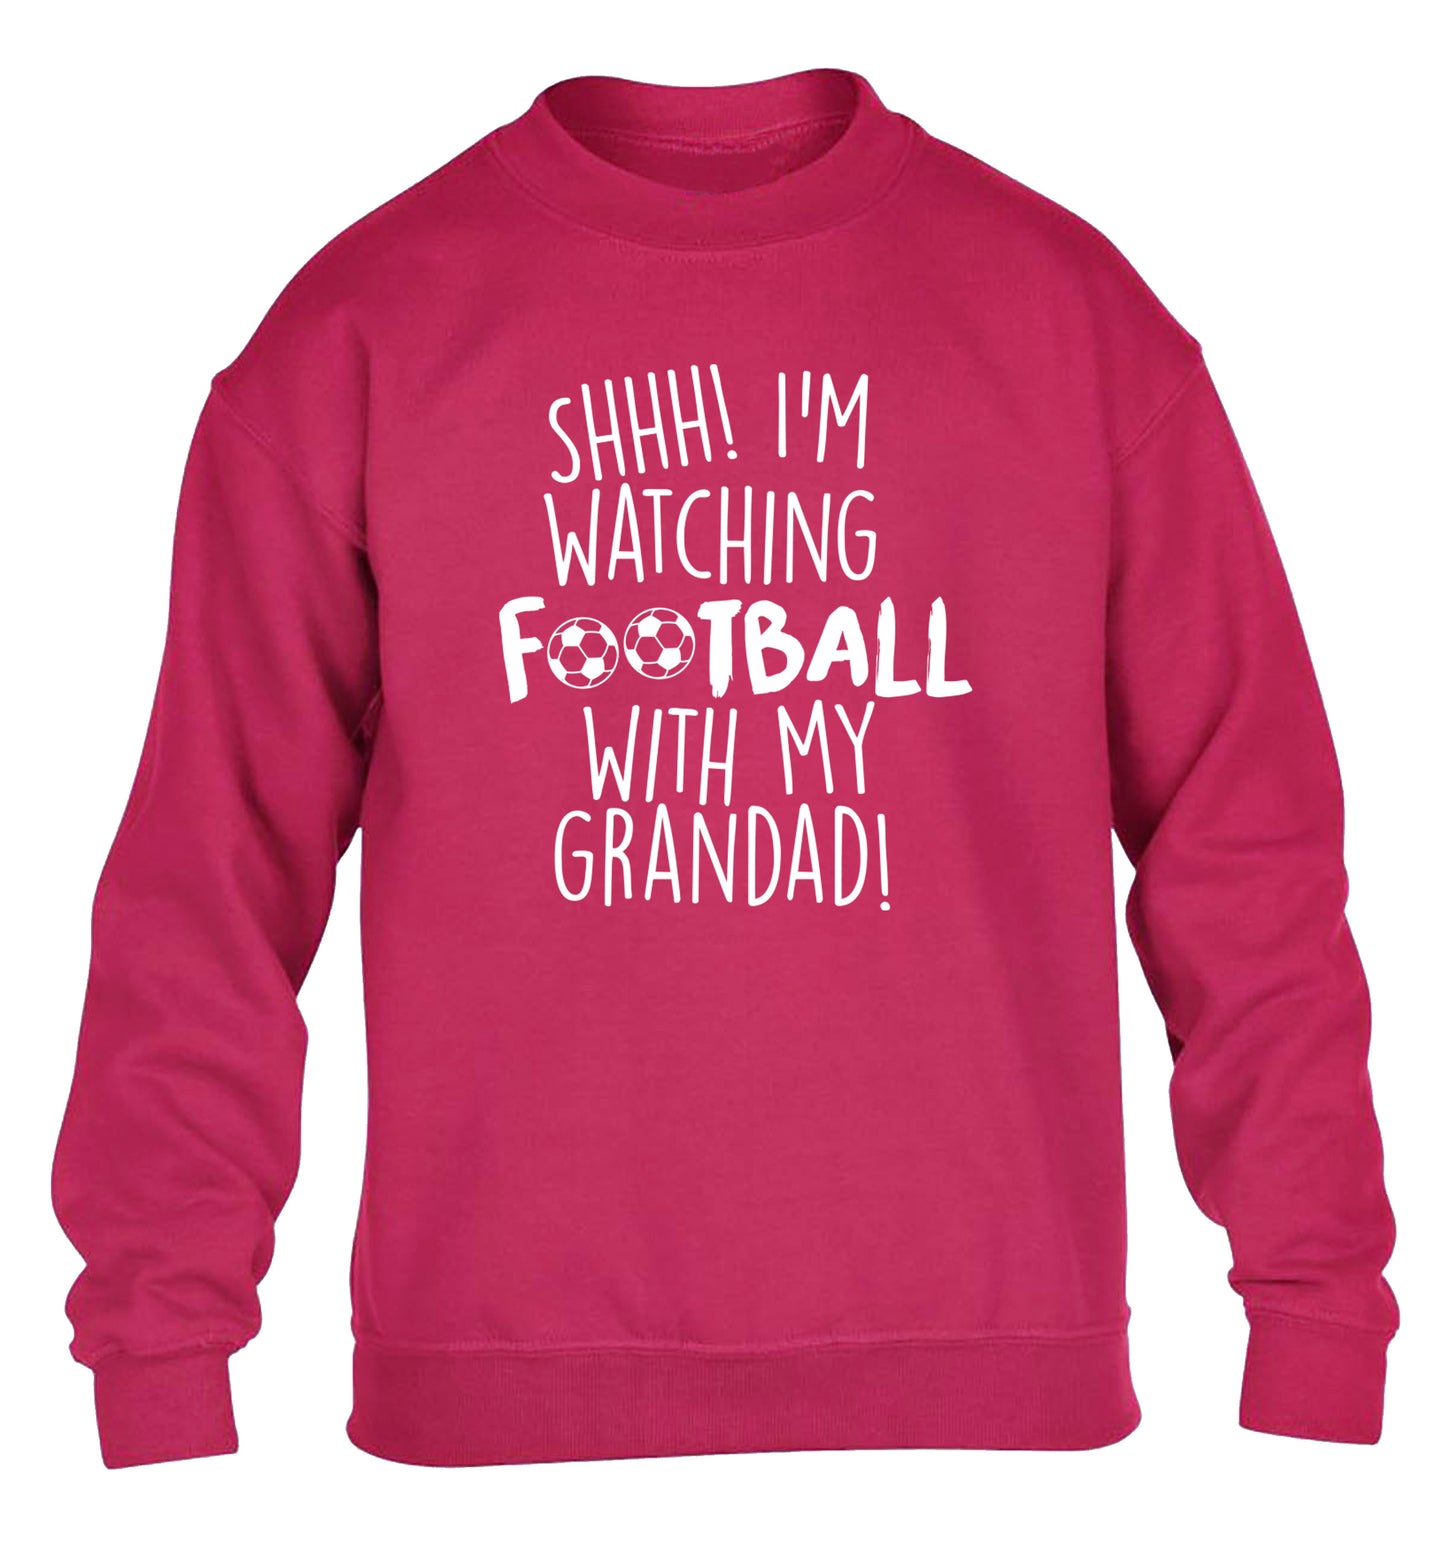 Shhh I'm watching football with my grandad children's pink sweater 12-14 Years